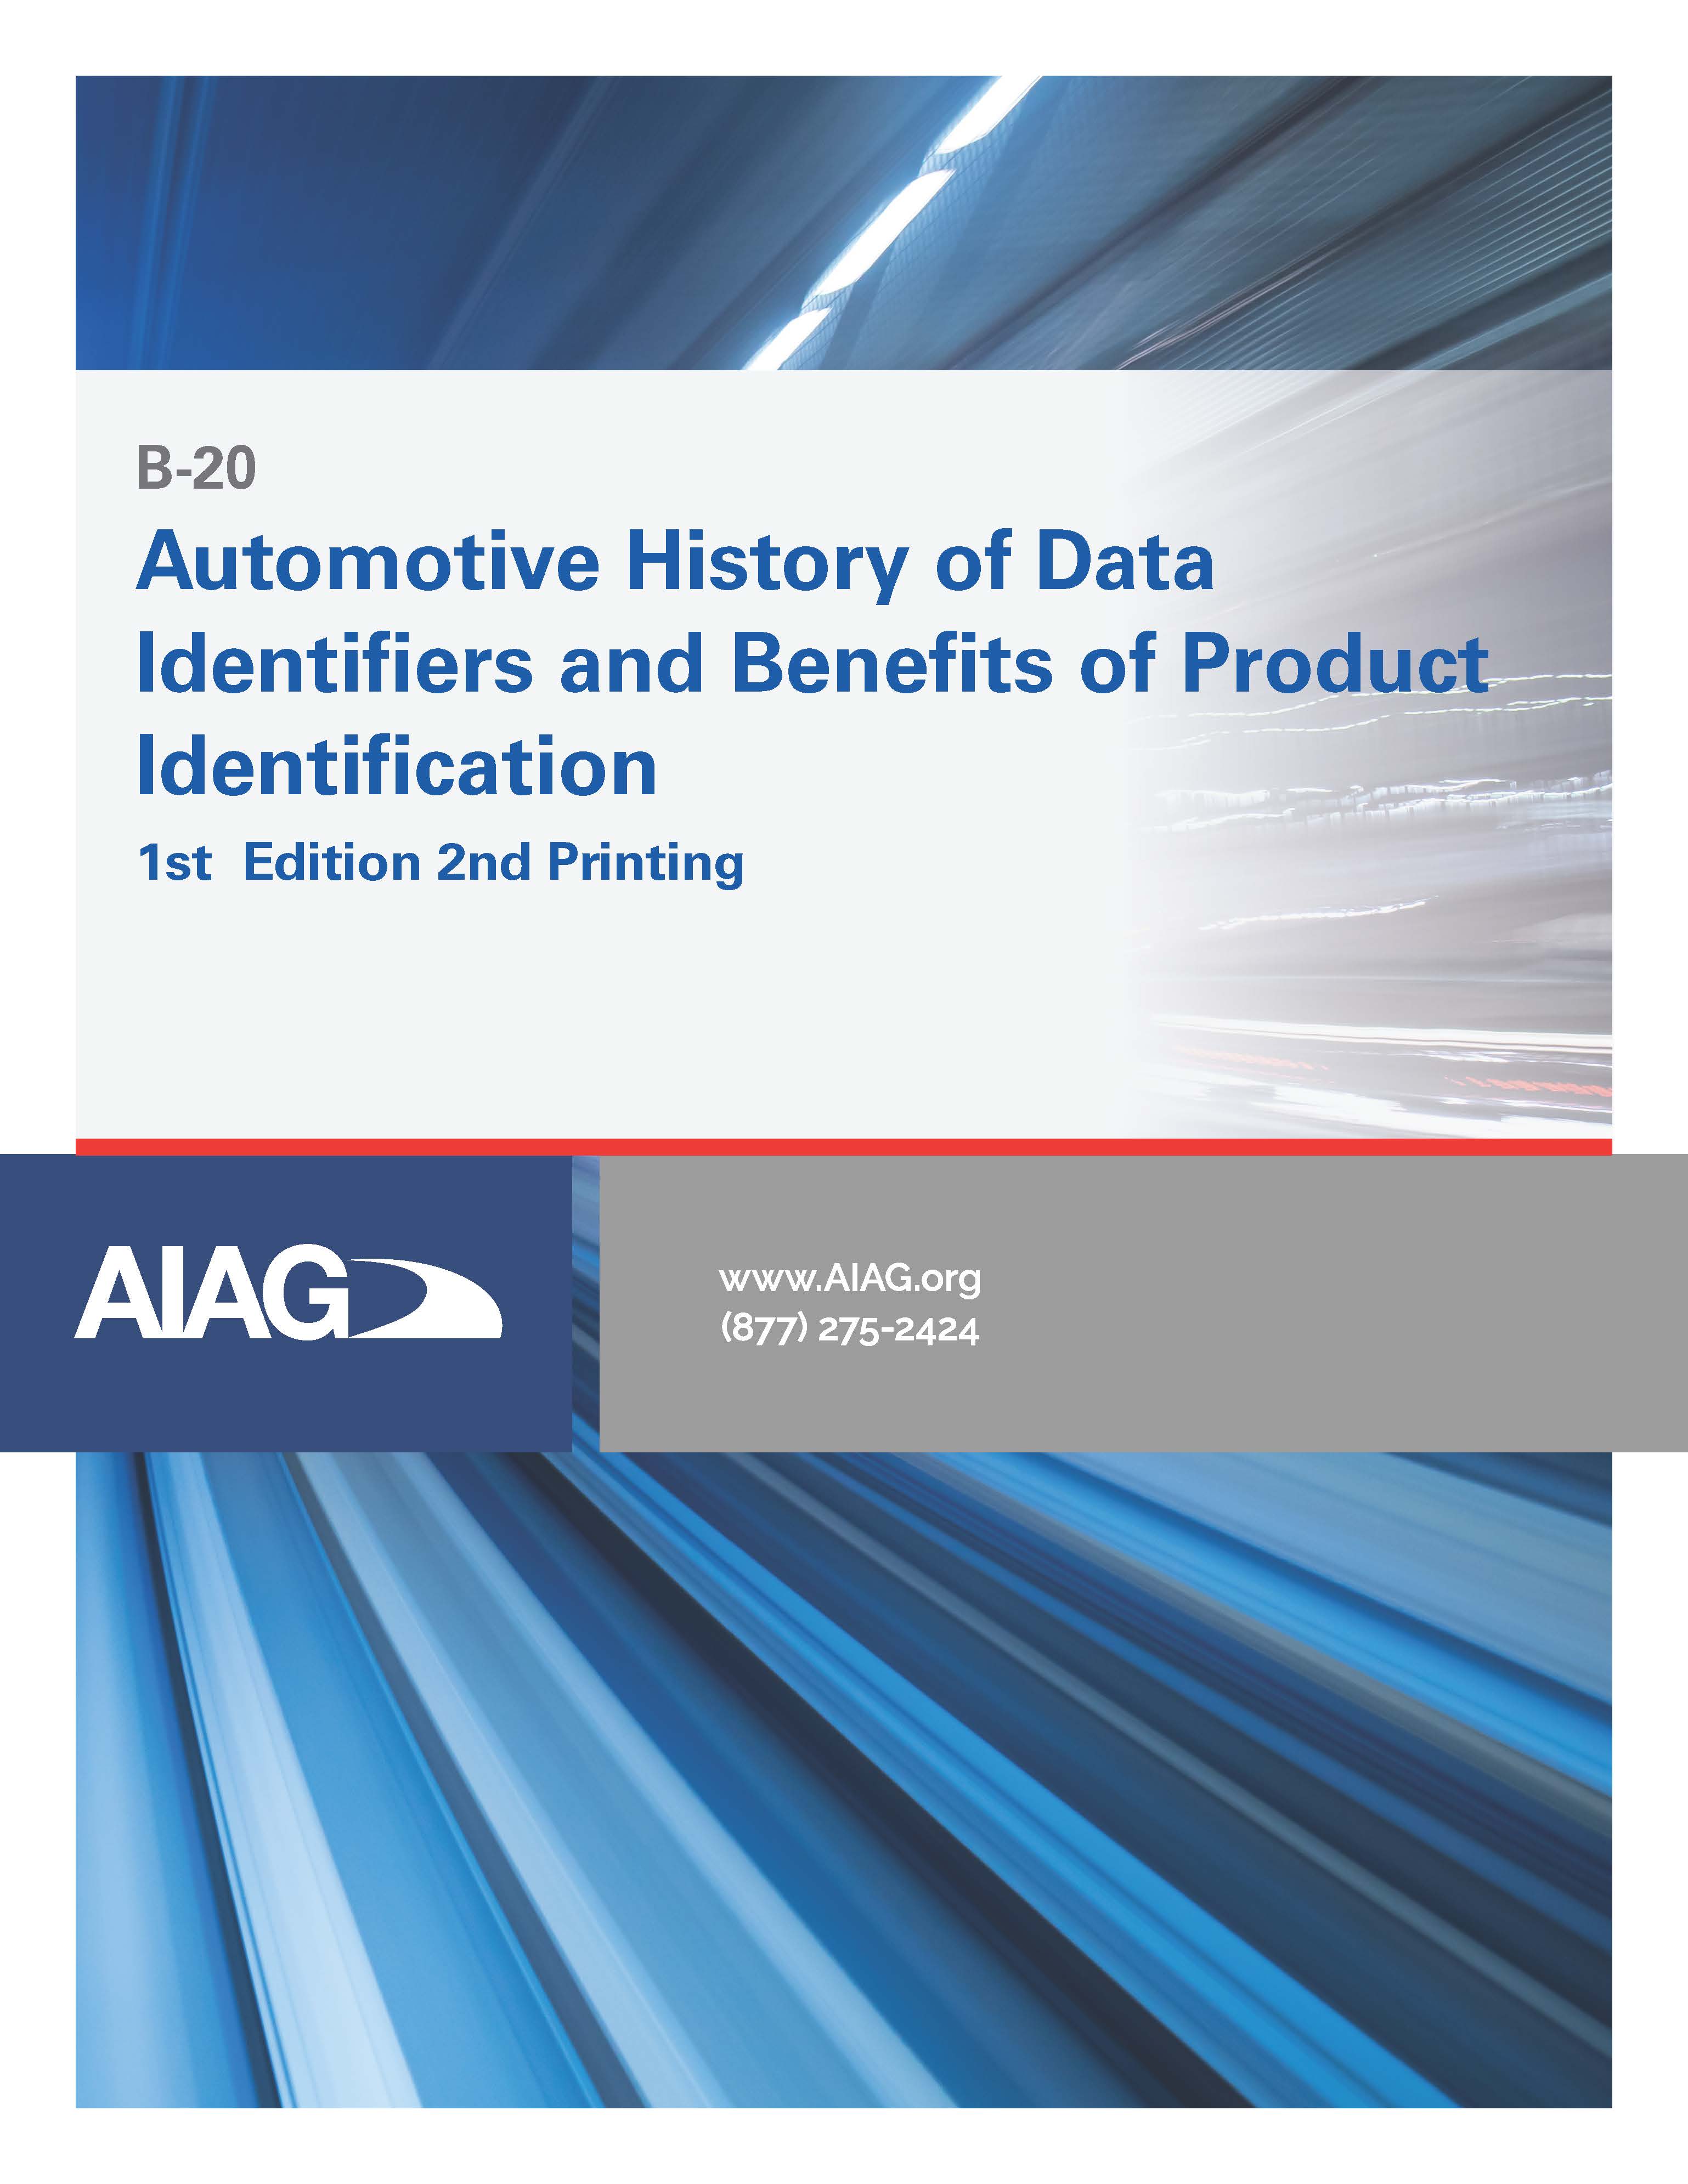 Publikation AIAG Automotive History of Data Identifiers 1.1.2023 Ansicht